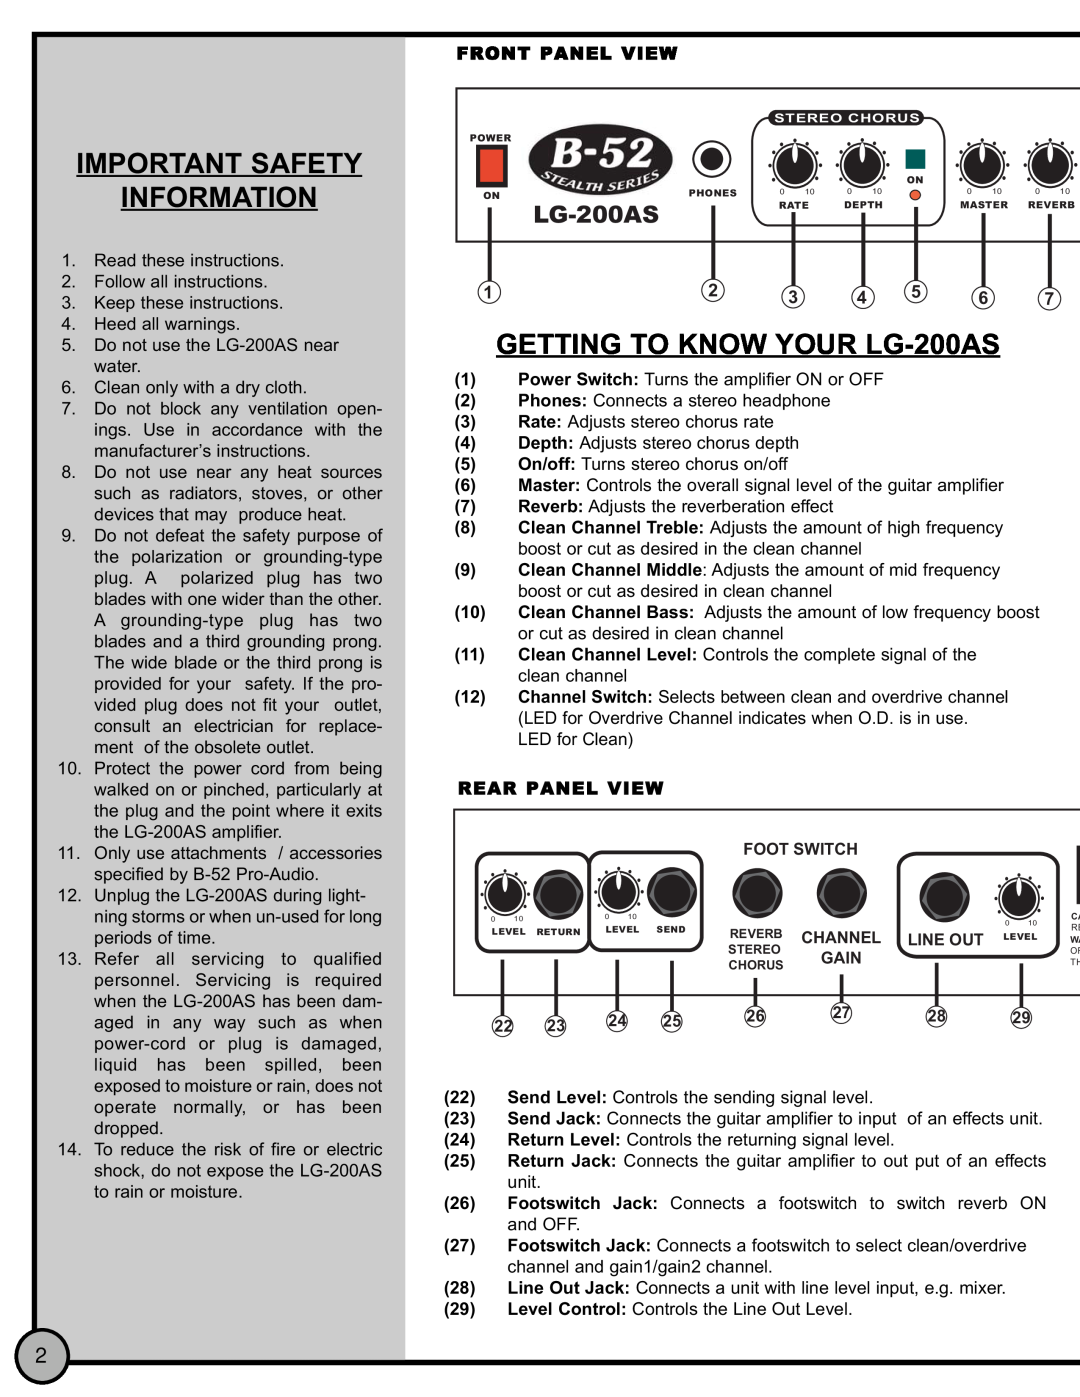 ETI Sound Systems, INC manual Important Safety Information, GETTING TO KNOW YOUR LG-200AS, Foot Switch, Line Out 